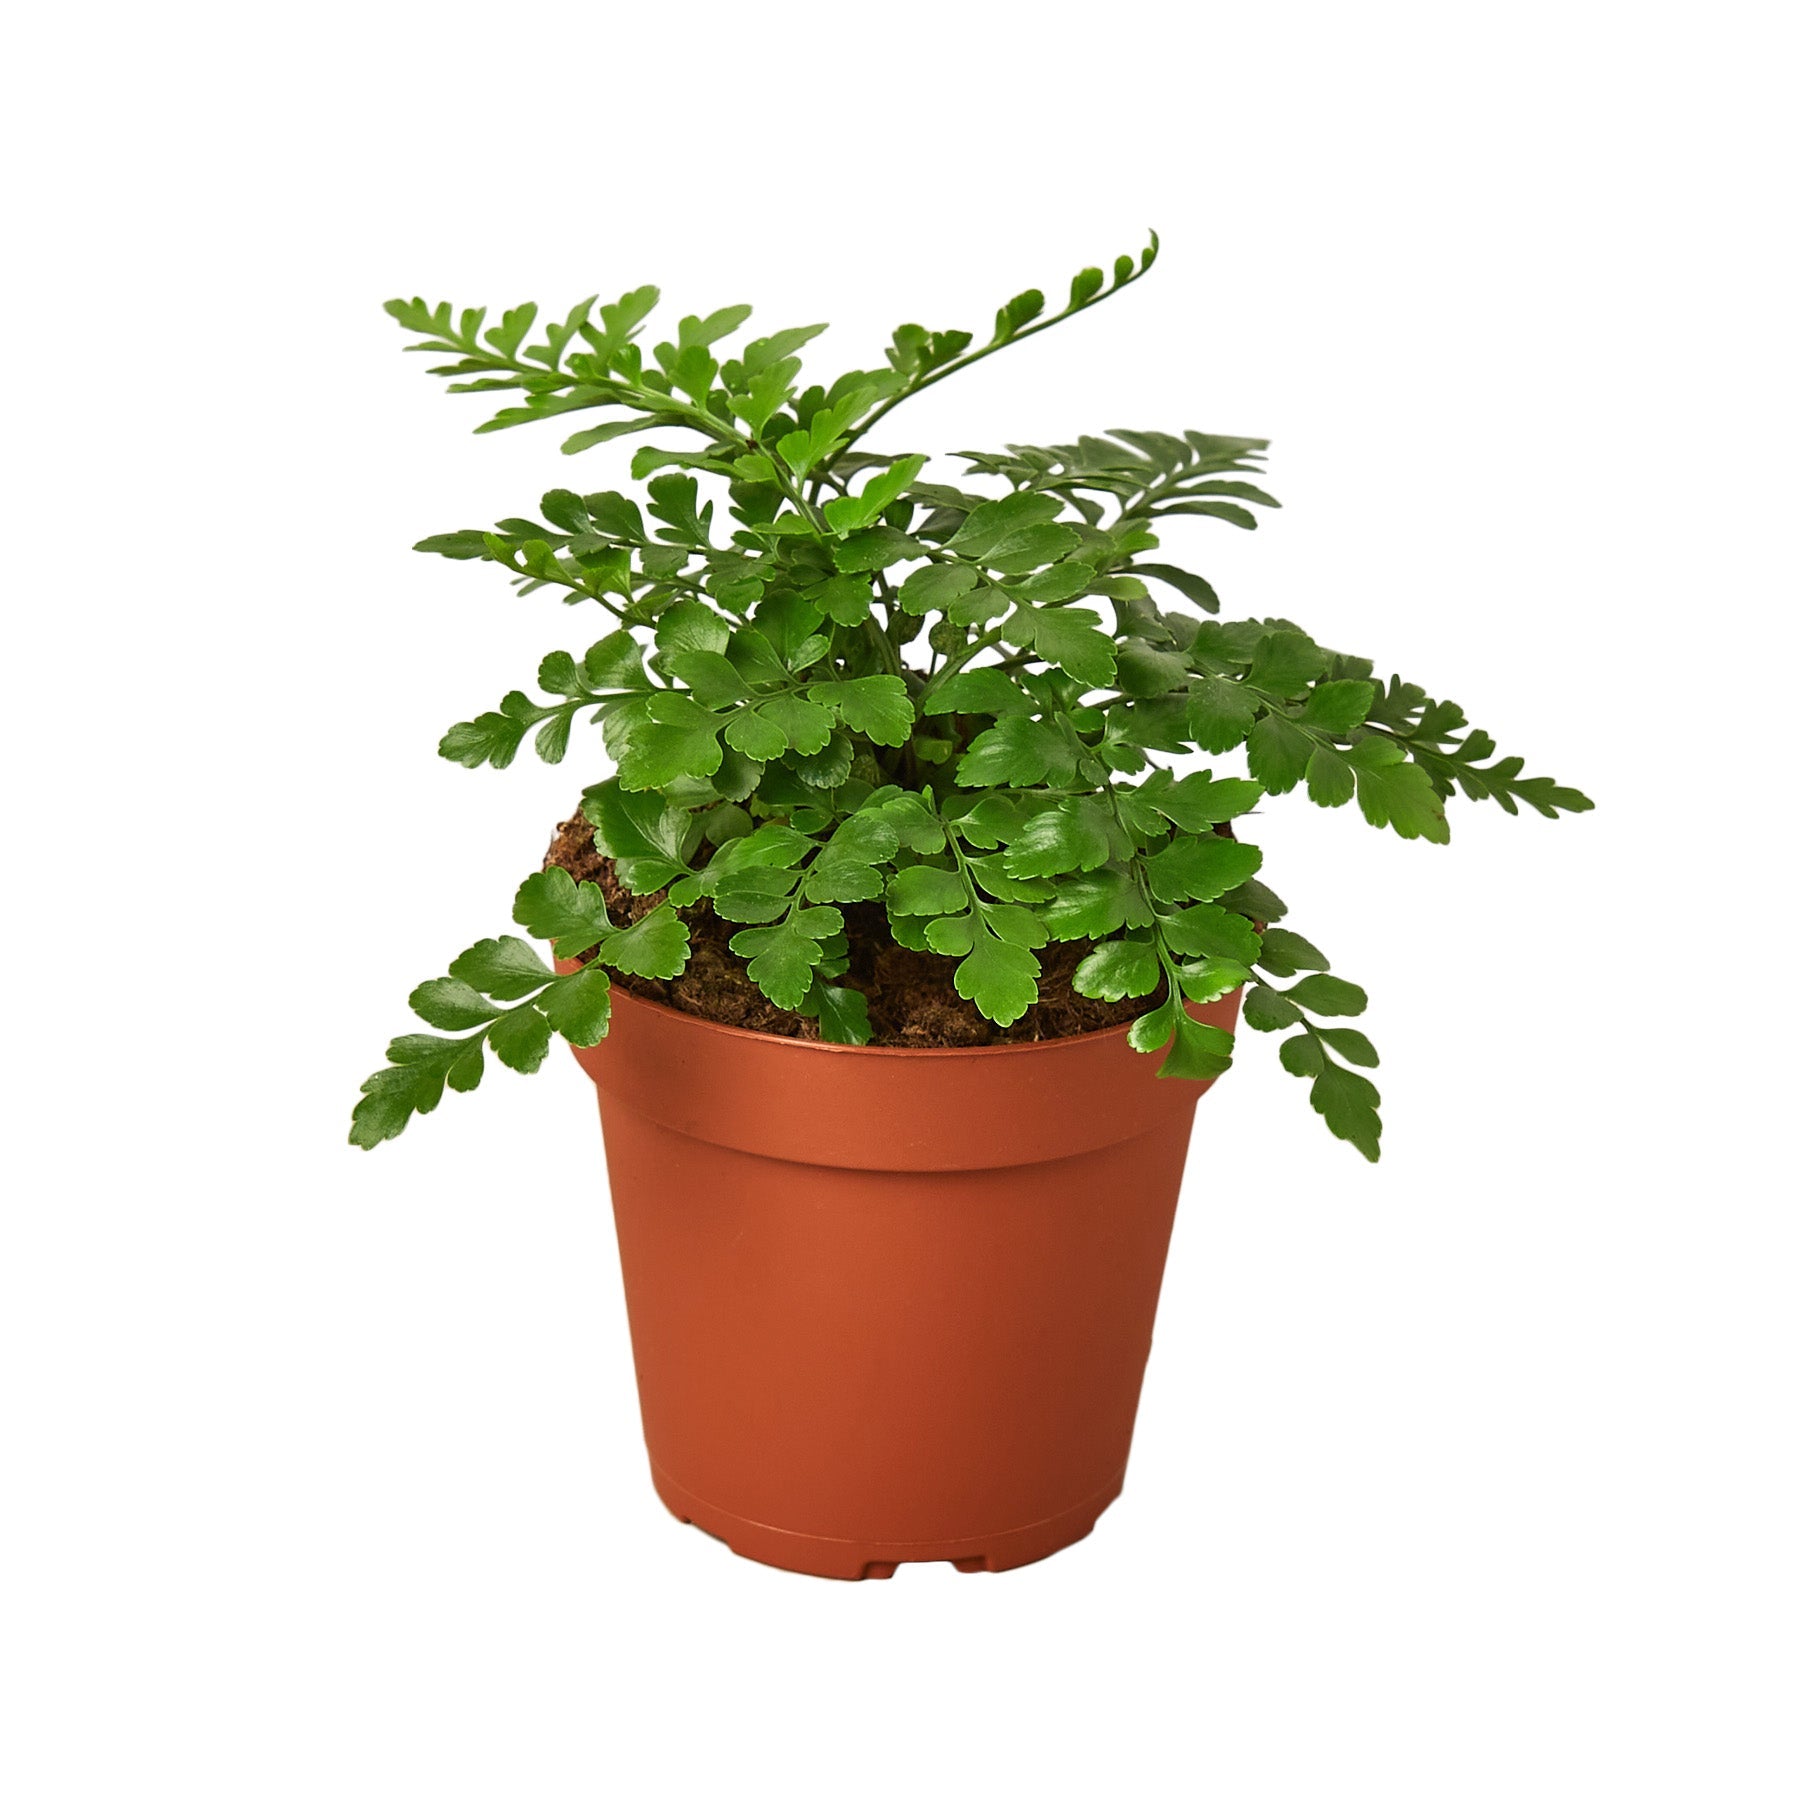 A small plant in a brown pot on a white background at the best garden nursery near me.